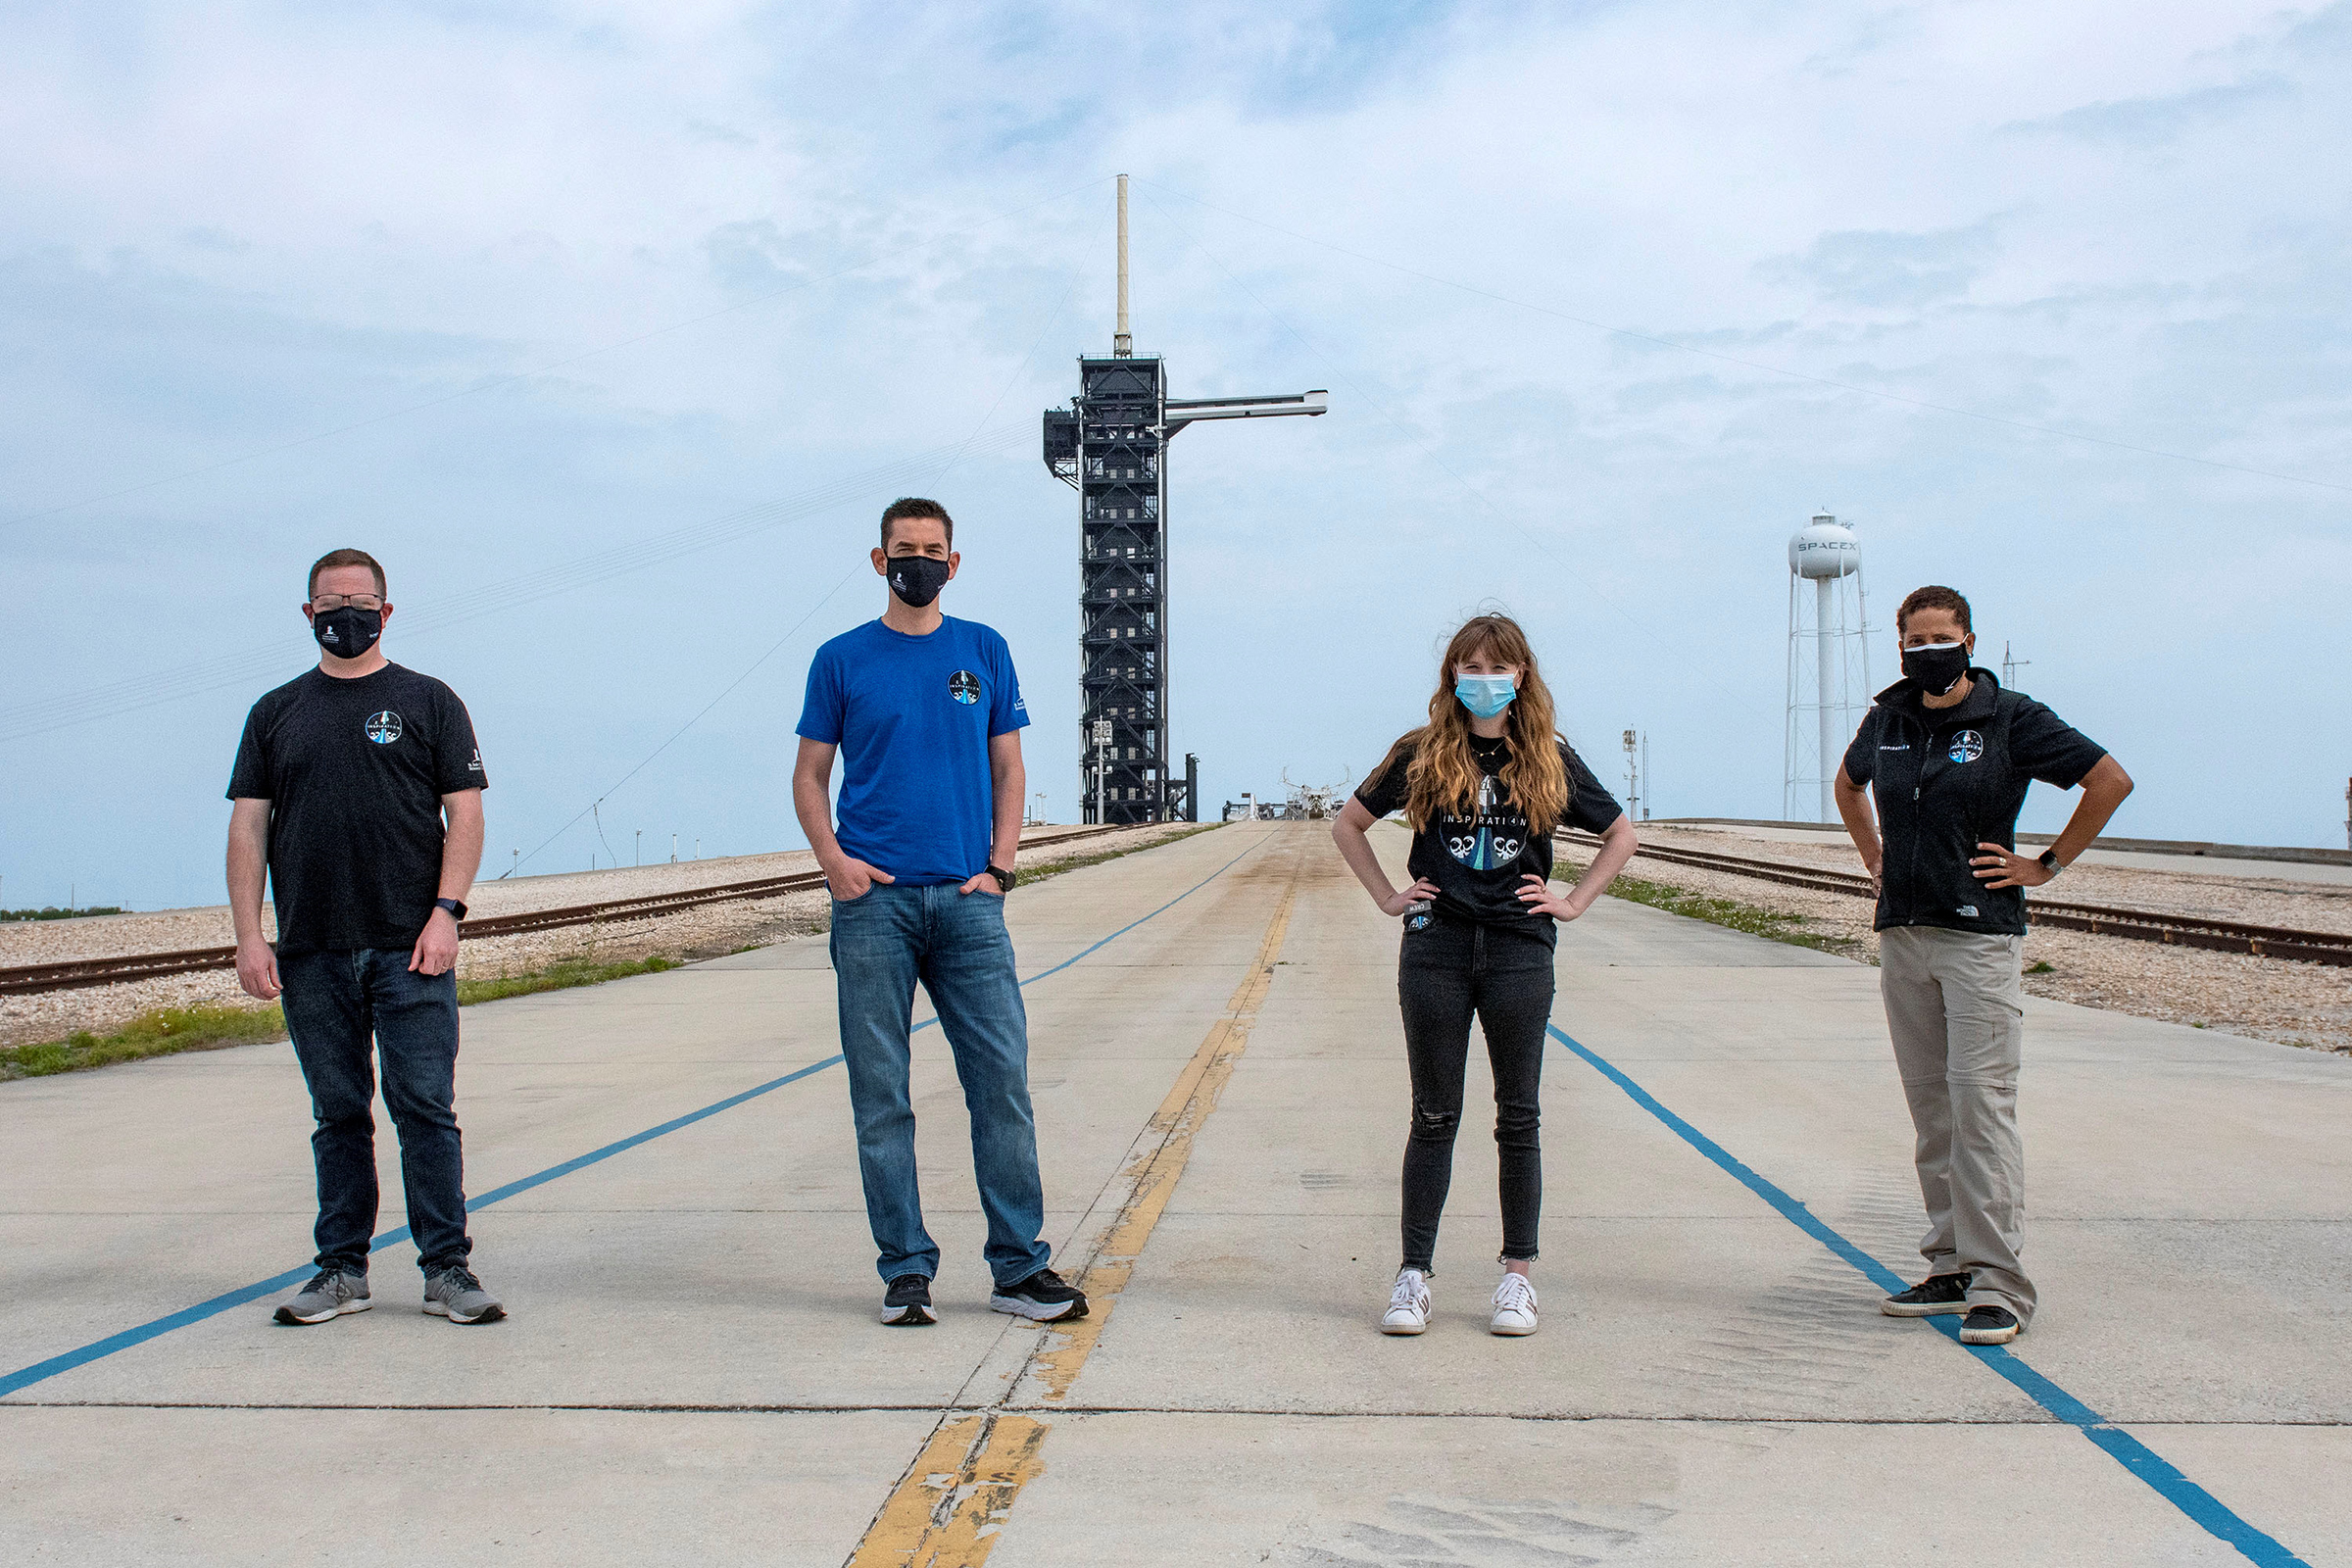 Chris Sembroski, Jared Isaacman, Hayley Arceneaux and Sian Proctor pose for a photo at NASA's Kennedy Space Center at Cape Canaveral, Florida, on March 29. (SpaceX/Handout/Reuters)